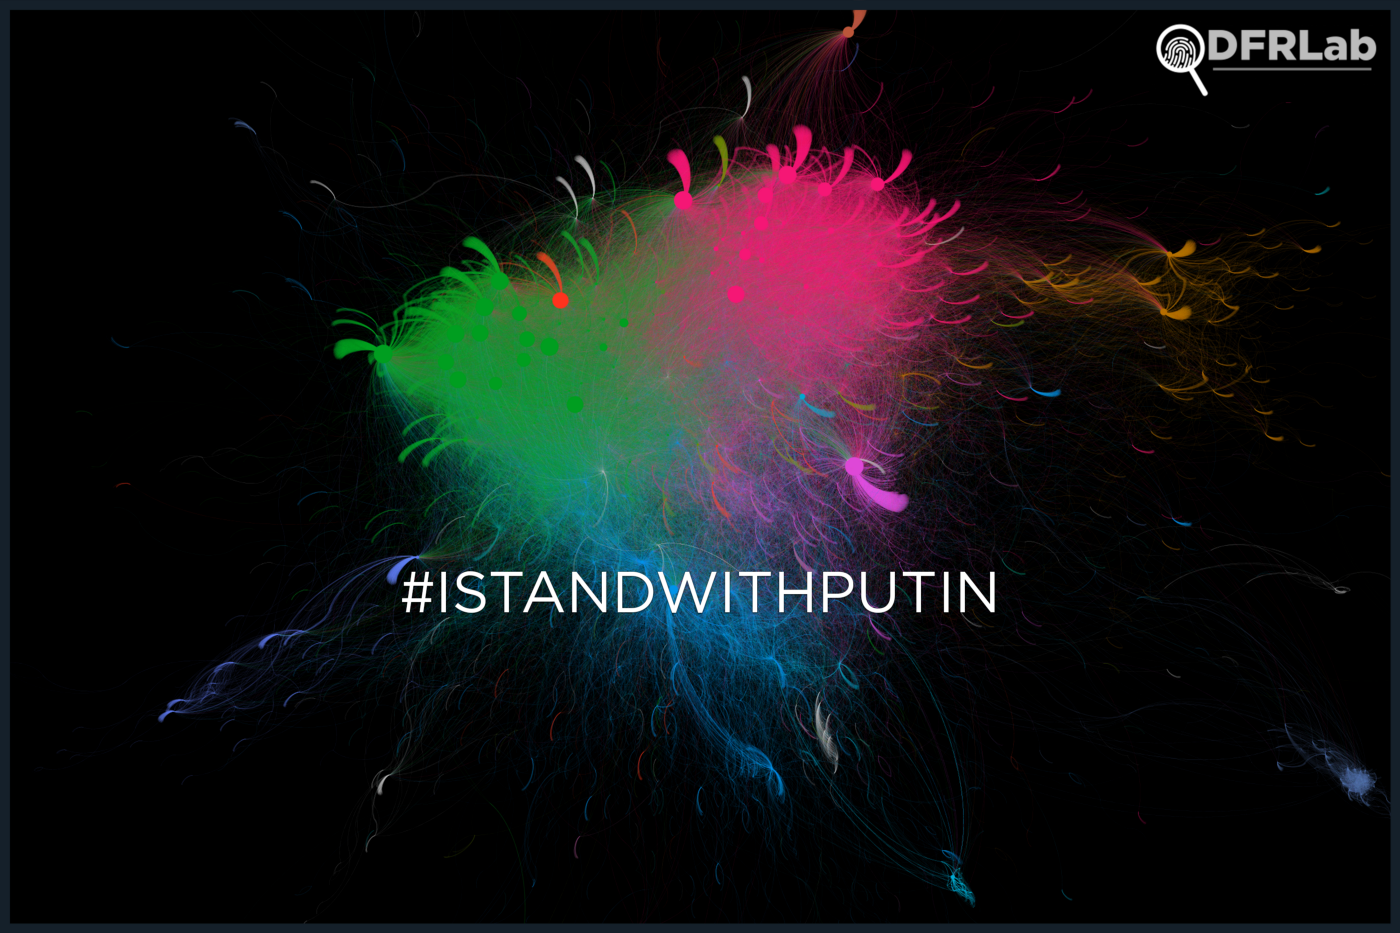 IStandWithPutin hashtag trends amid dubious amplification efforts